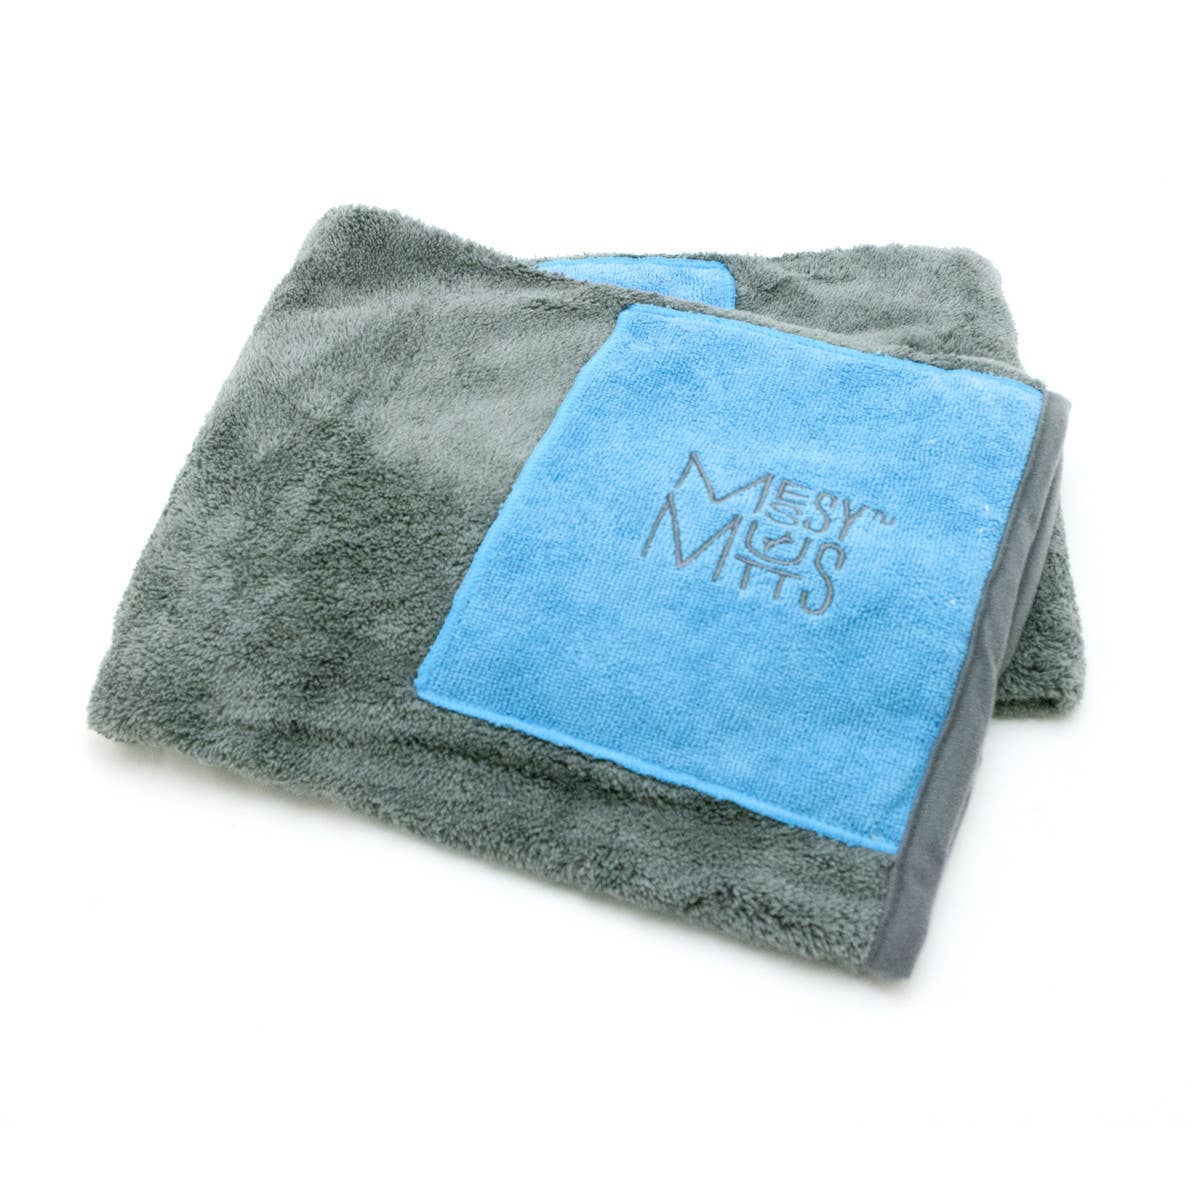 Messy Mutts Microfiber Towel -Cool Grey MED 20x32